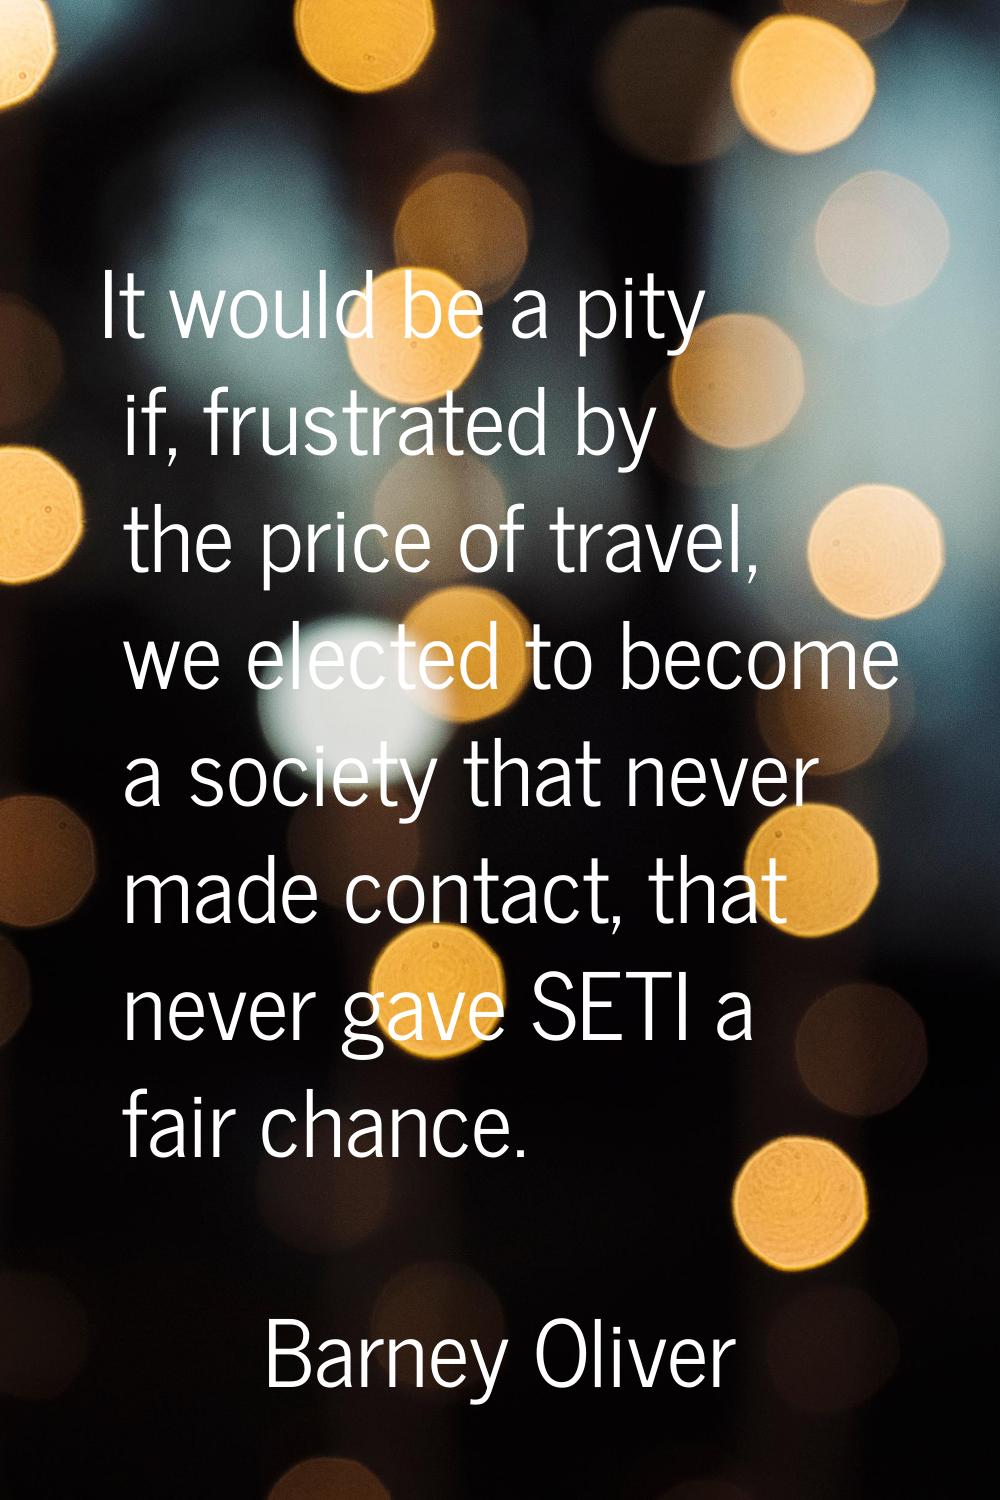 It would be a pity if, frustrated by the price of travel, we elected to become a society that never